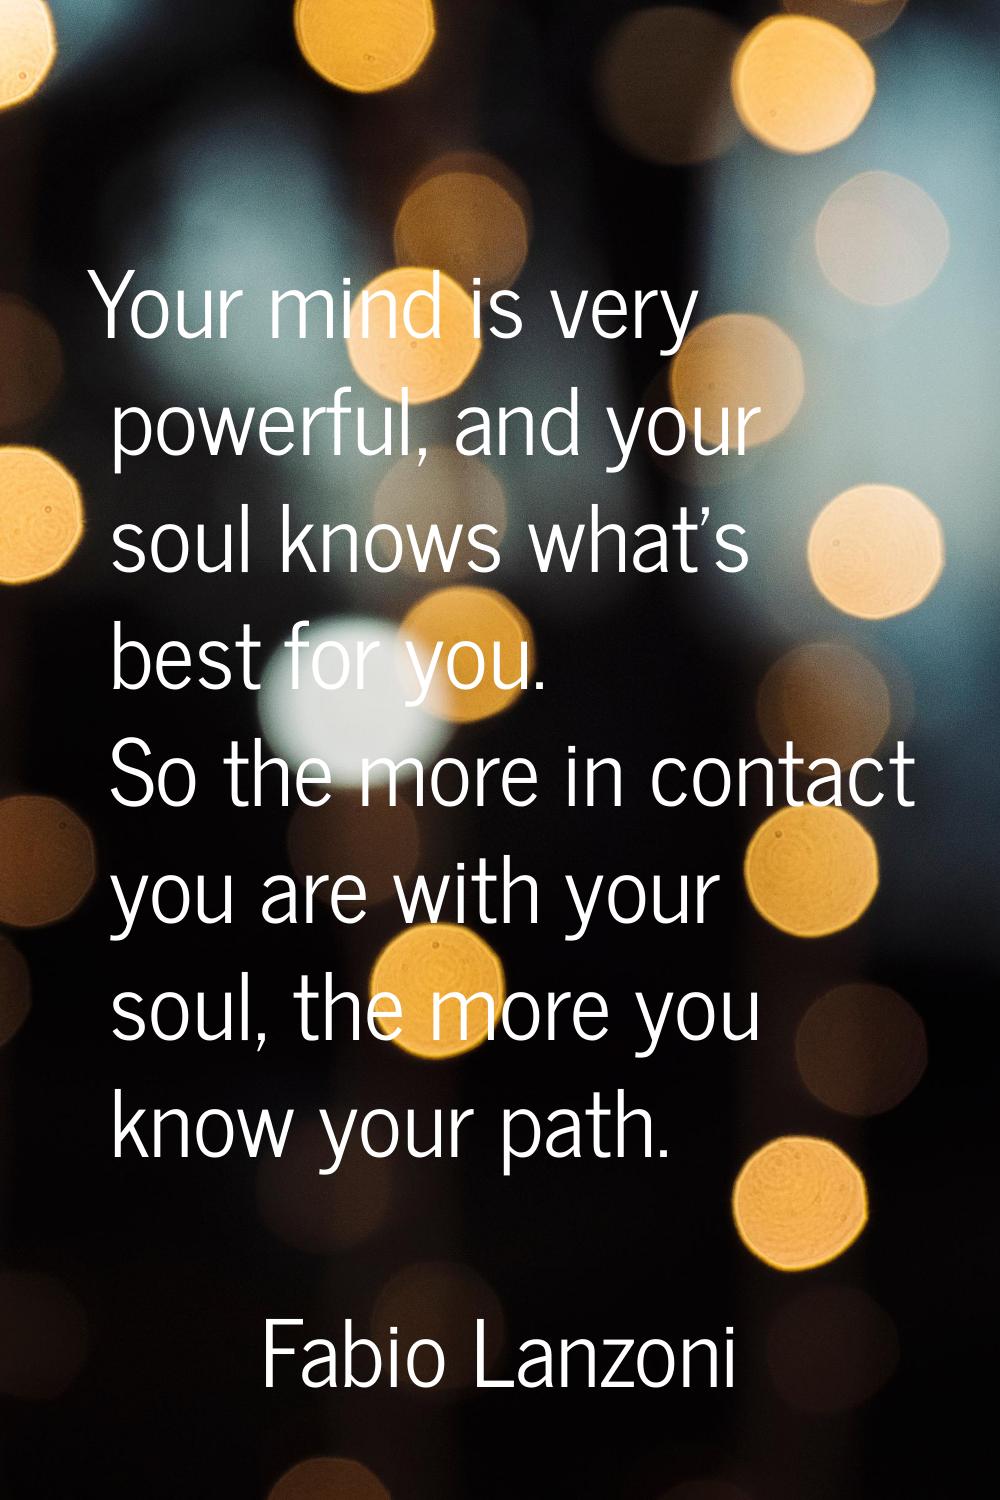 Your mind is very powerful, and your soul knows what's best for you. So the more in contact you are